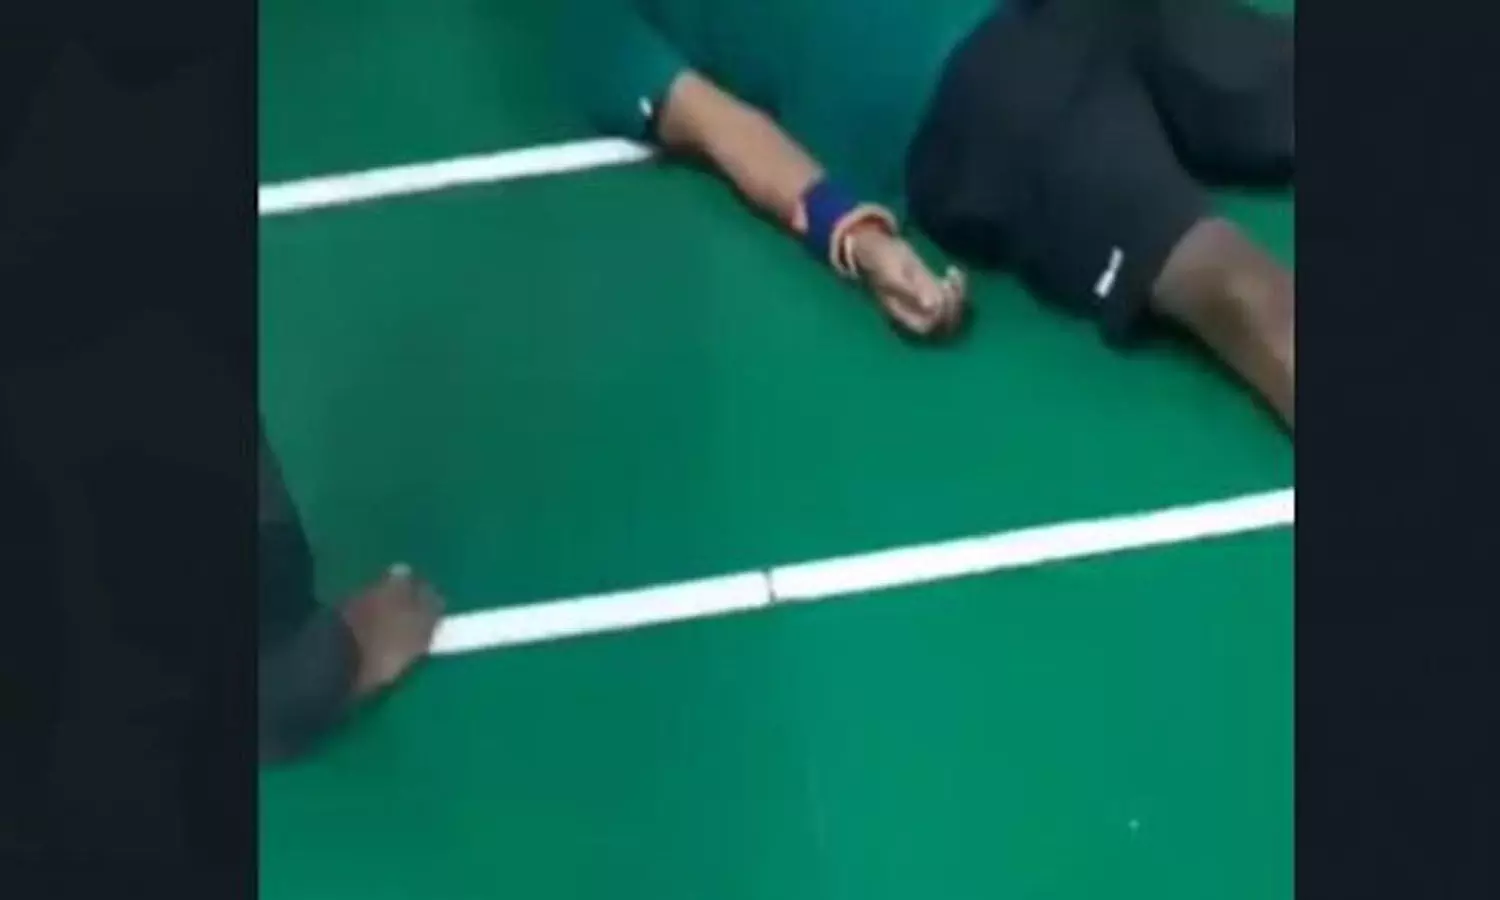 38-year-old dies due to heart attack while playing badminton in Hyderabad